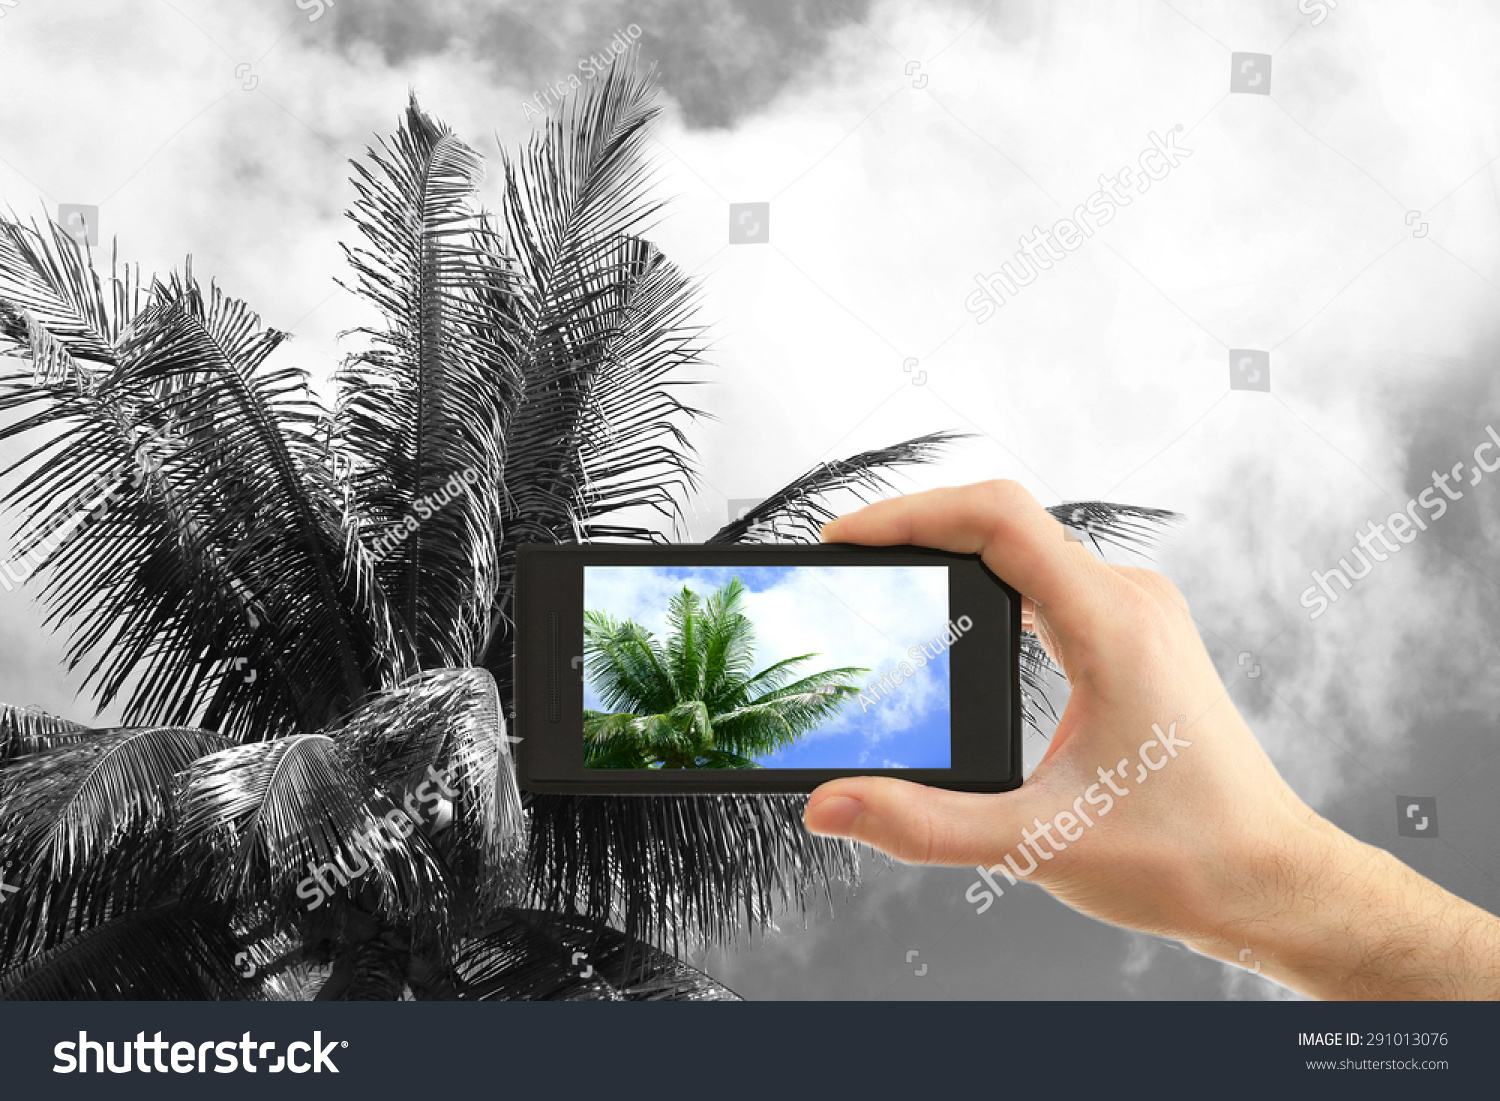 Hand taking photo of palm by smartphone #291013076